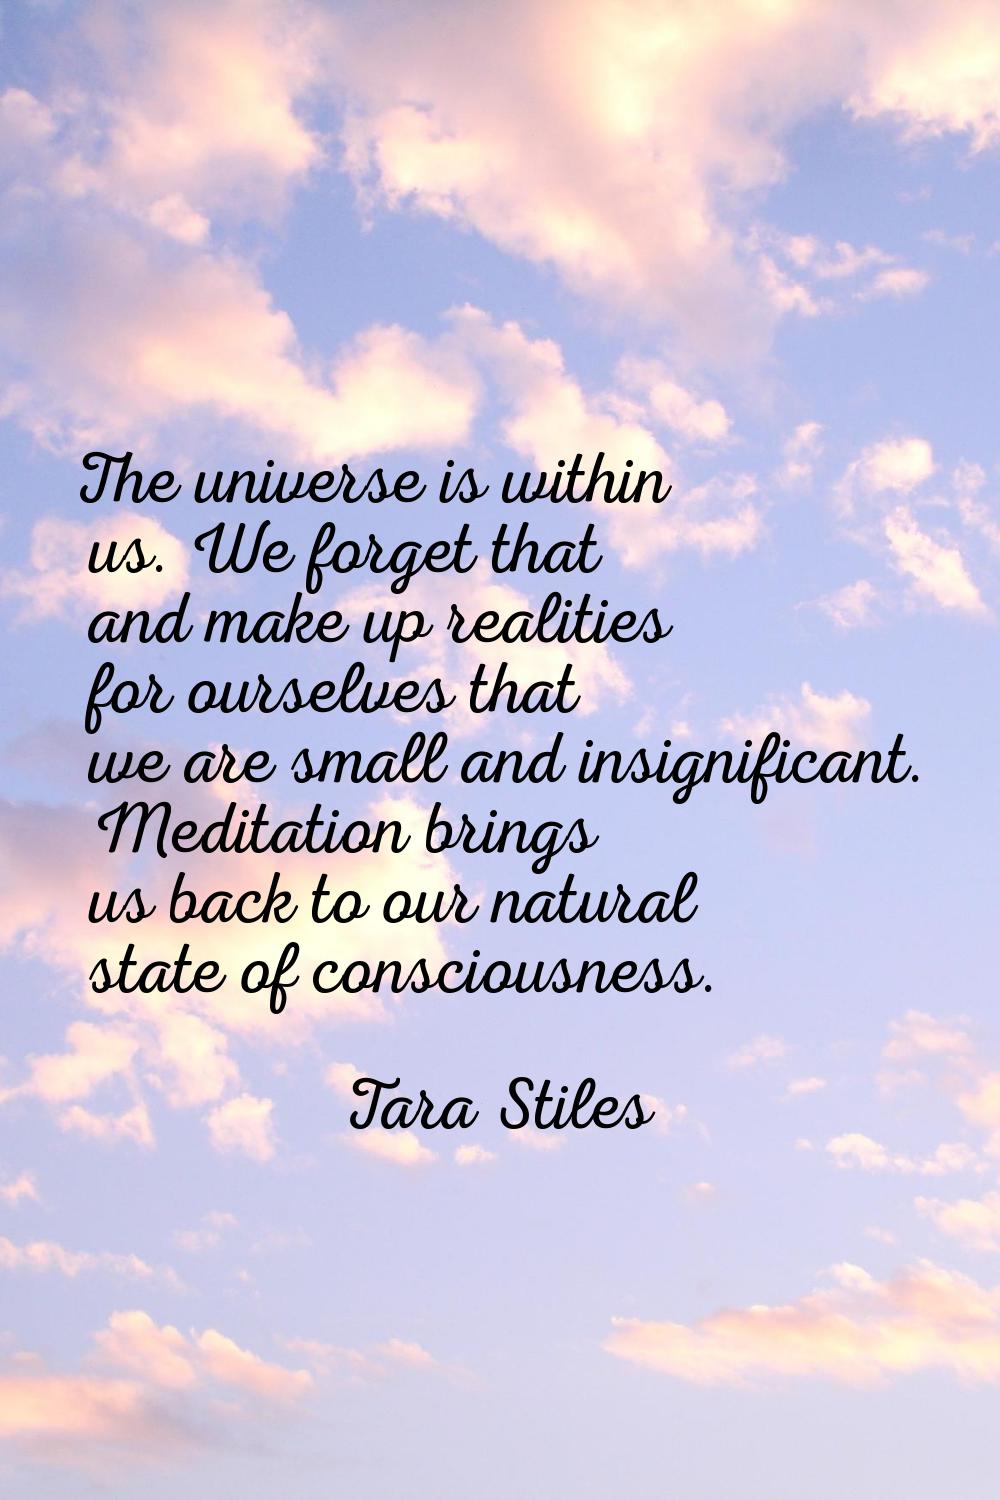 The universe is within us. We forget that and make up realities for ourselves that we are small and